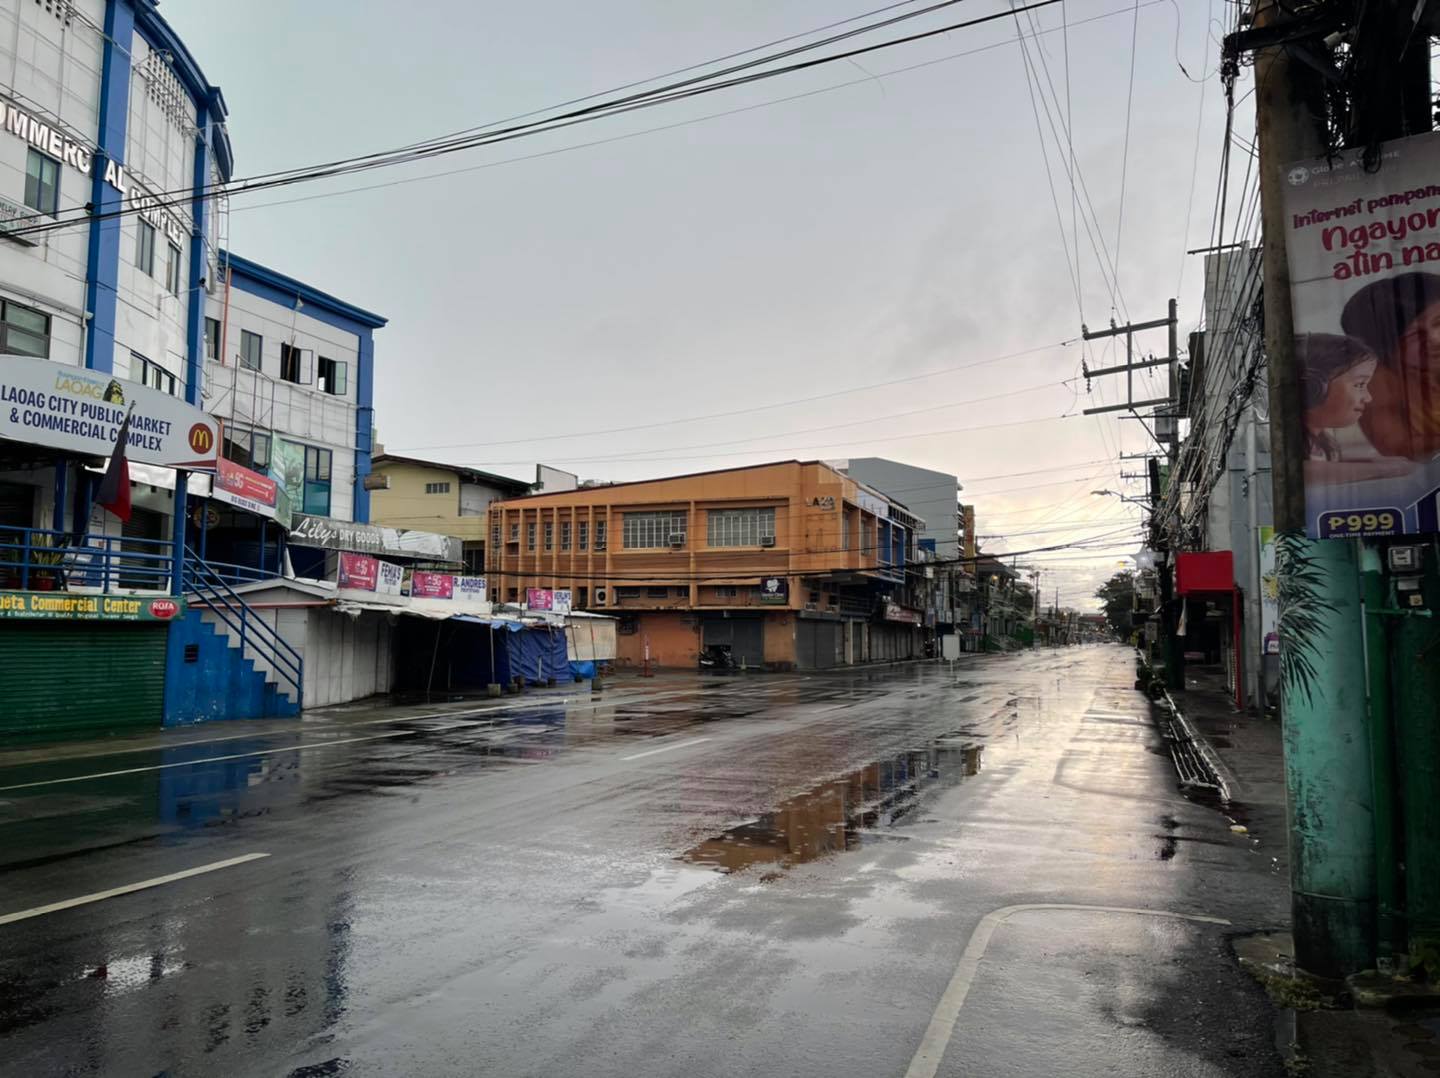 The central commercial district of Ilocos Norte's capital city of Laoag is seen empty on Aug. 29, the fourth Sunday when the “No Movement Day" was enforced as a measure to curb the spread of COVID-19. (Photo courtesy of Laoag City government)